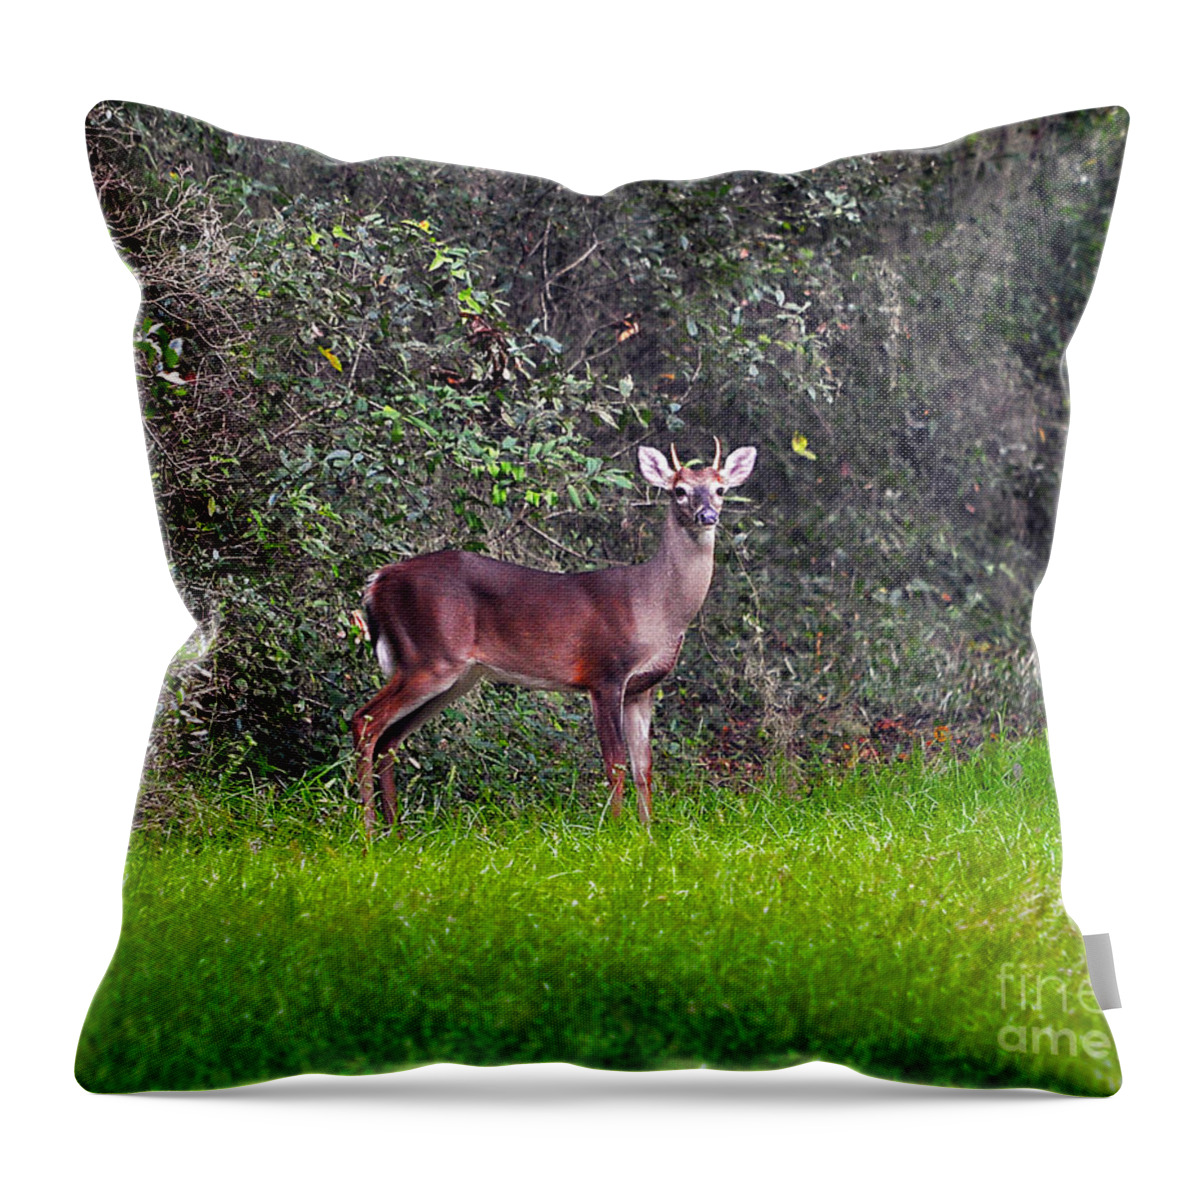 Deer Throw Pillow featuring the photograph Young Buck by Al Powell Photography USA